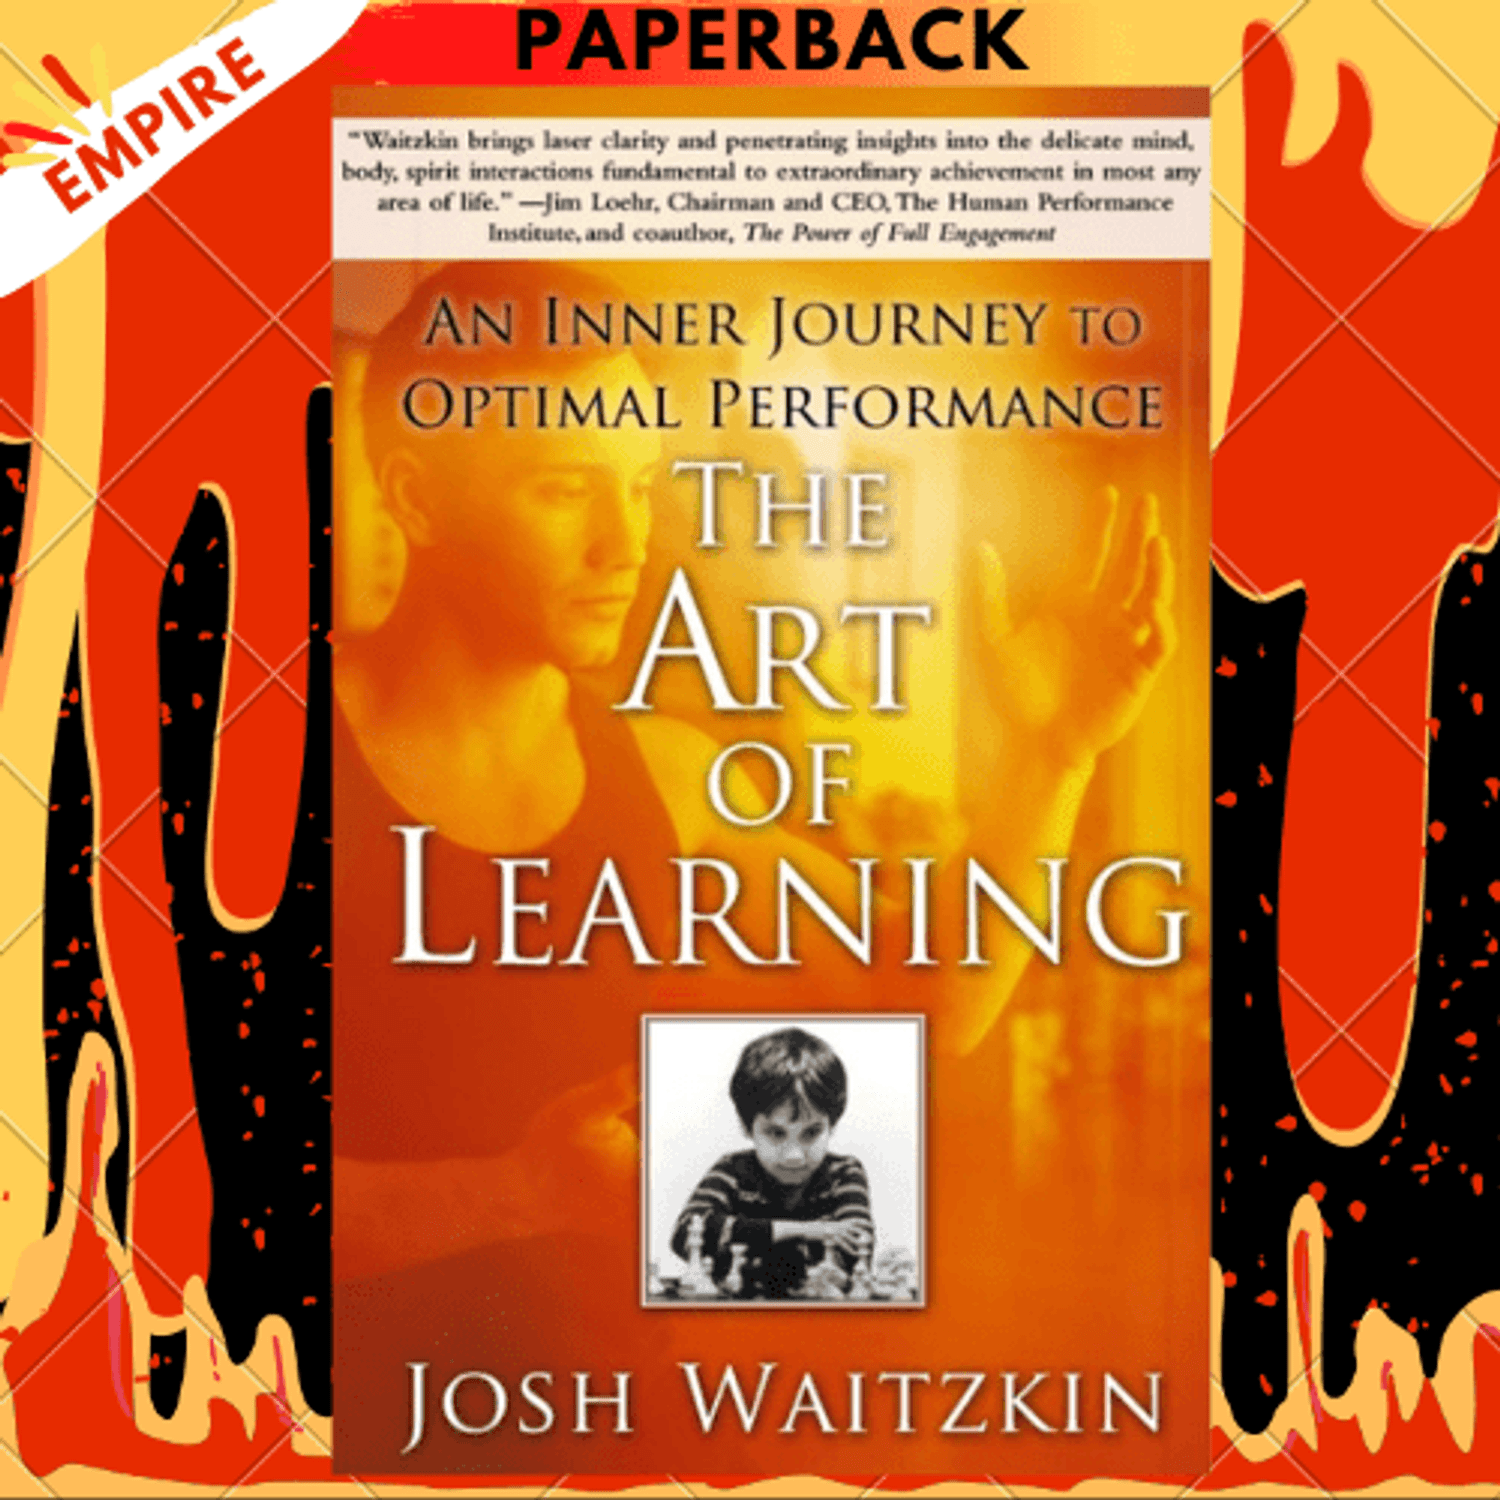 The Art of Learning : An Inner Journey to Optimal Performance by